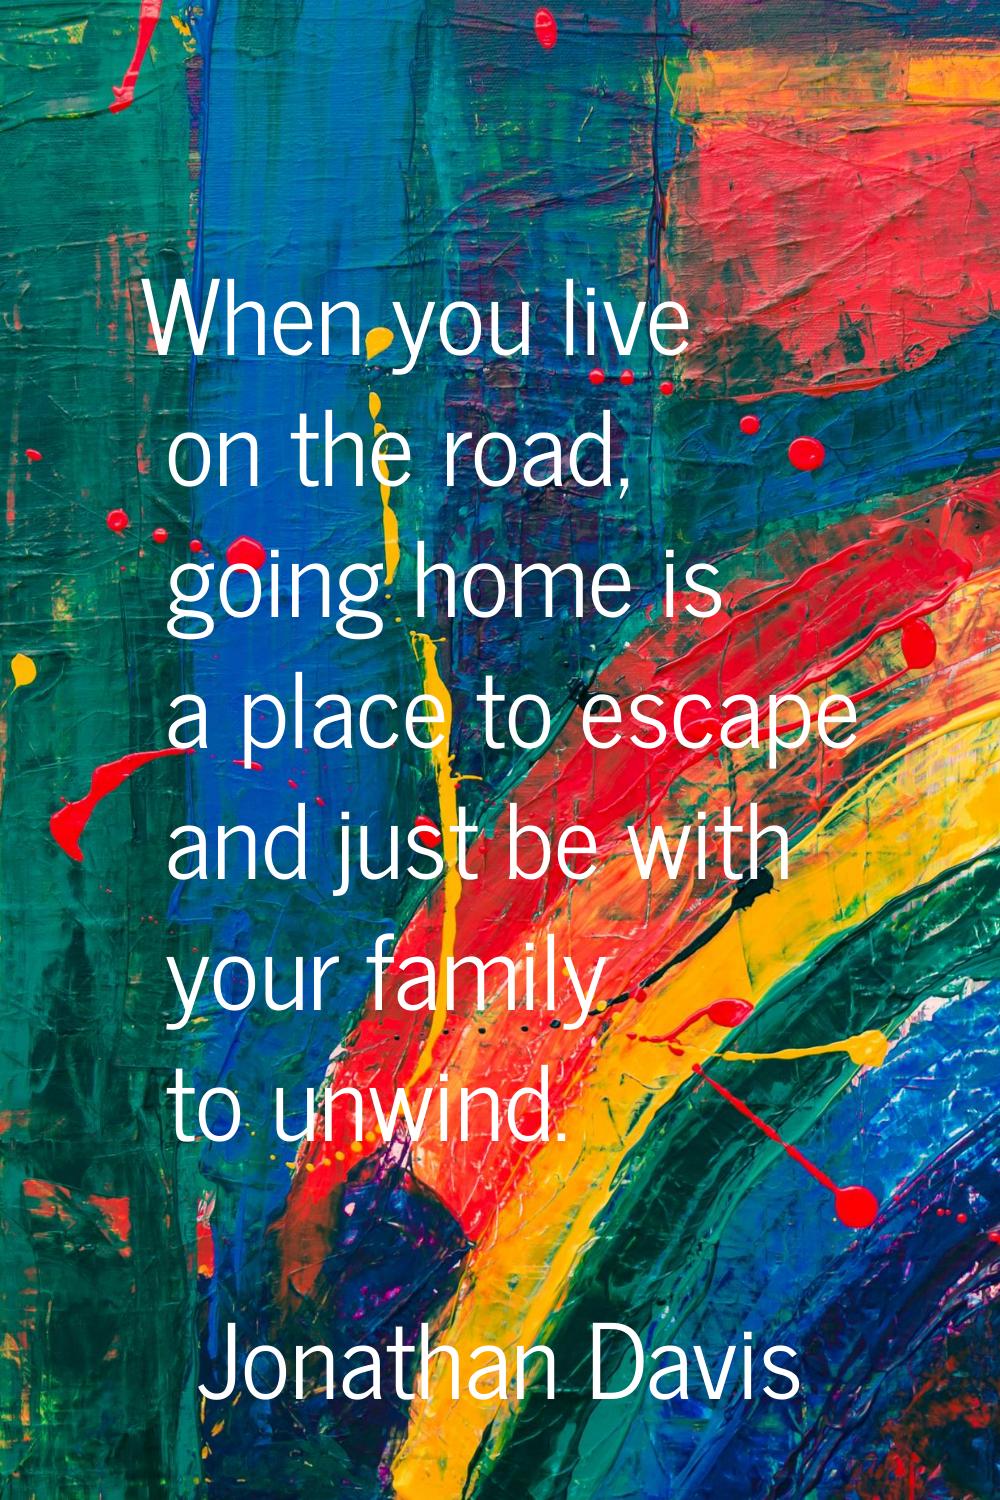 When you live on the road, going home is a place to escape and just be with your family to unwind.